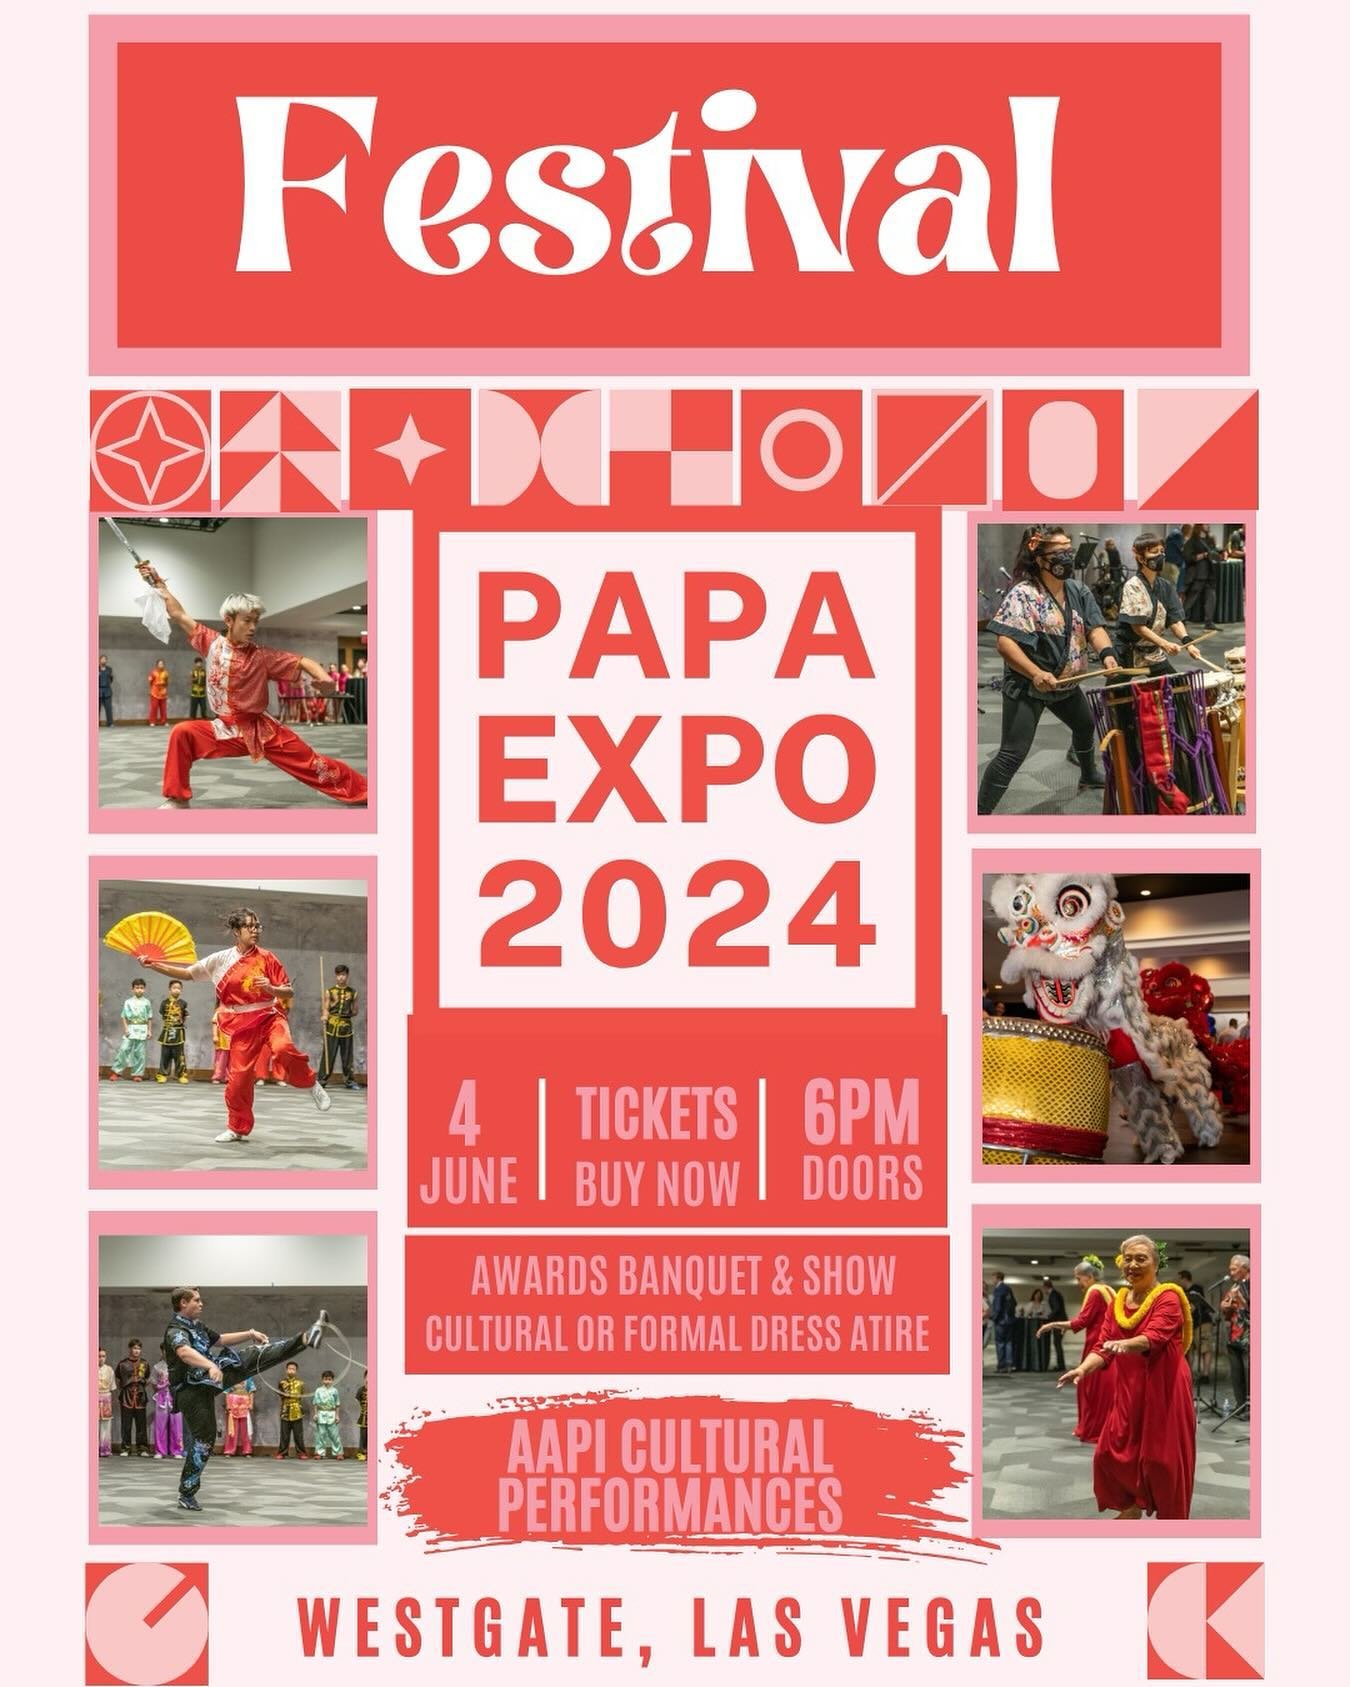 Tickets are still available for the Festival during the PAPA Expo! This Festival has always been a special part of Expo where our organization gets to share pieces of AAPI culture with our members and guests. Please join us for dinner and shows!! Get